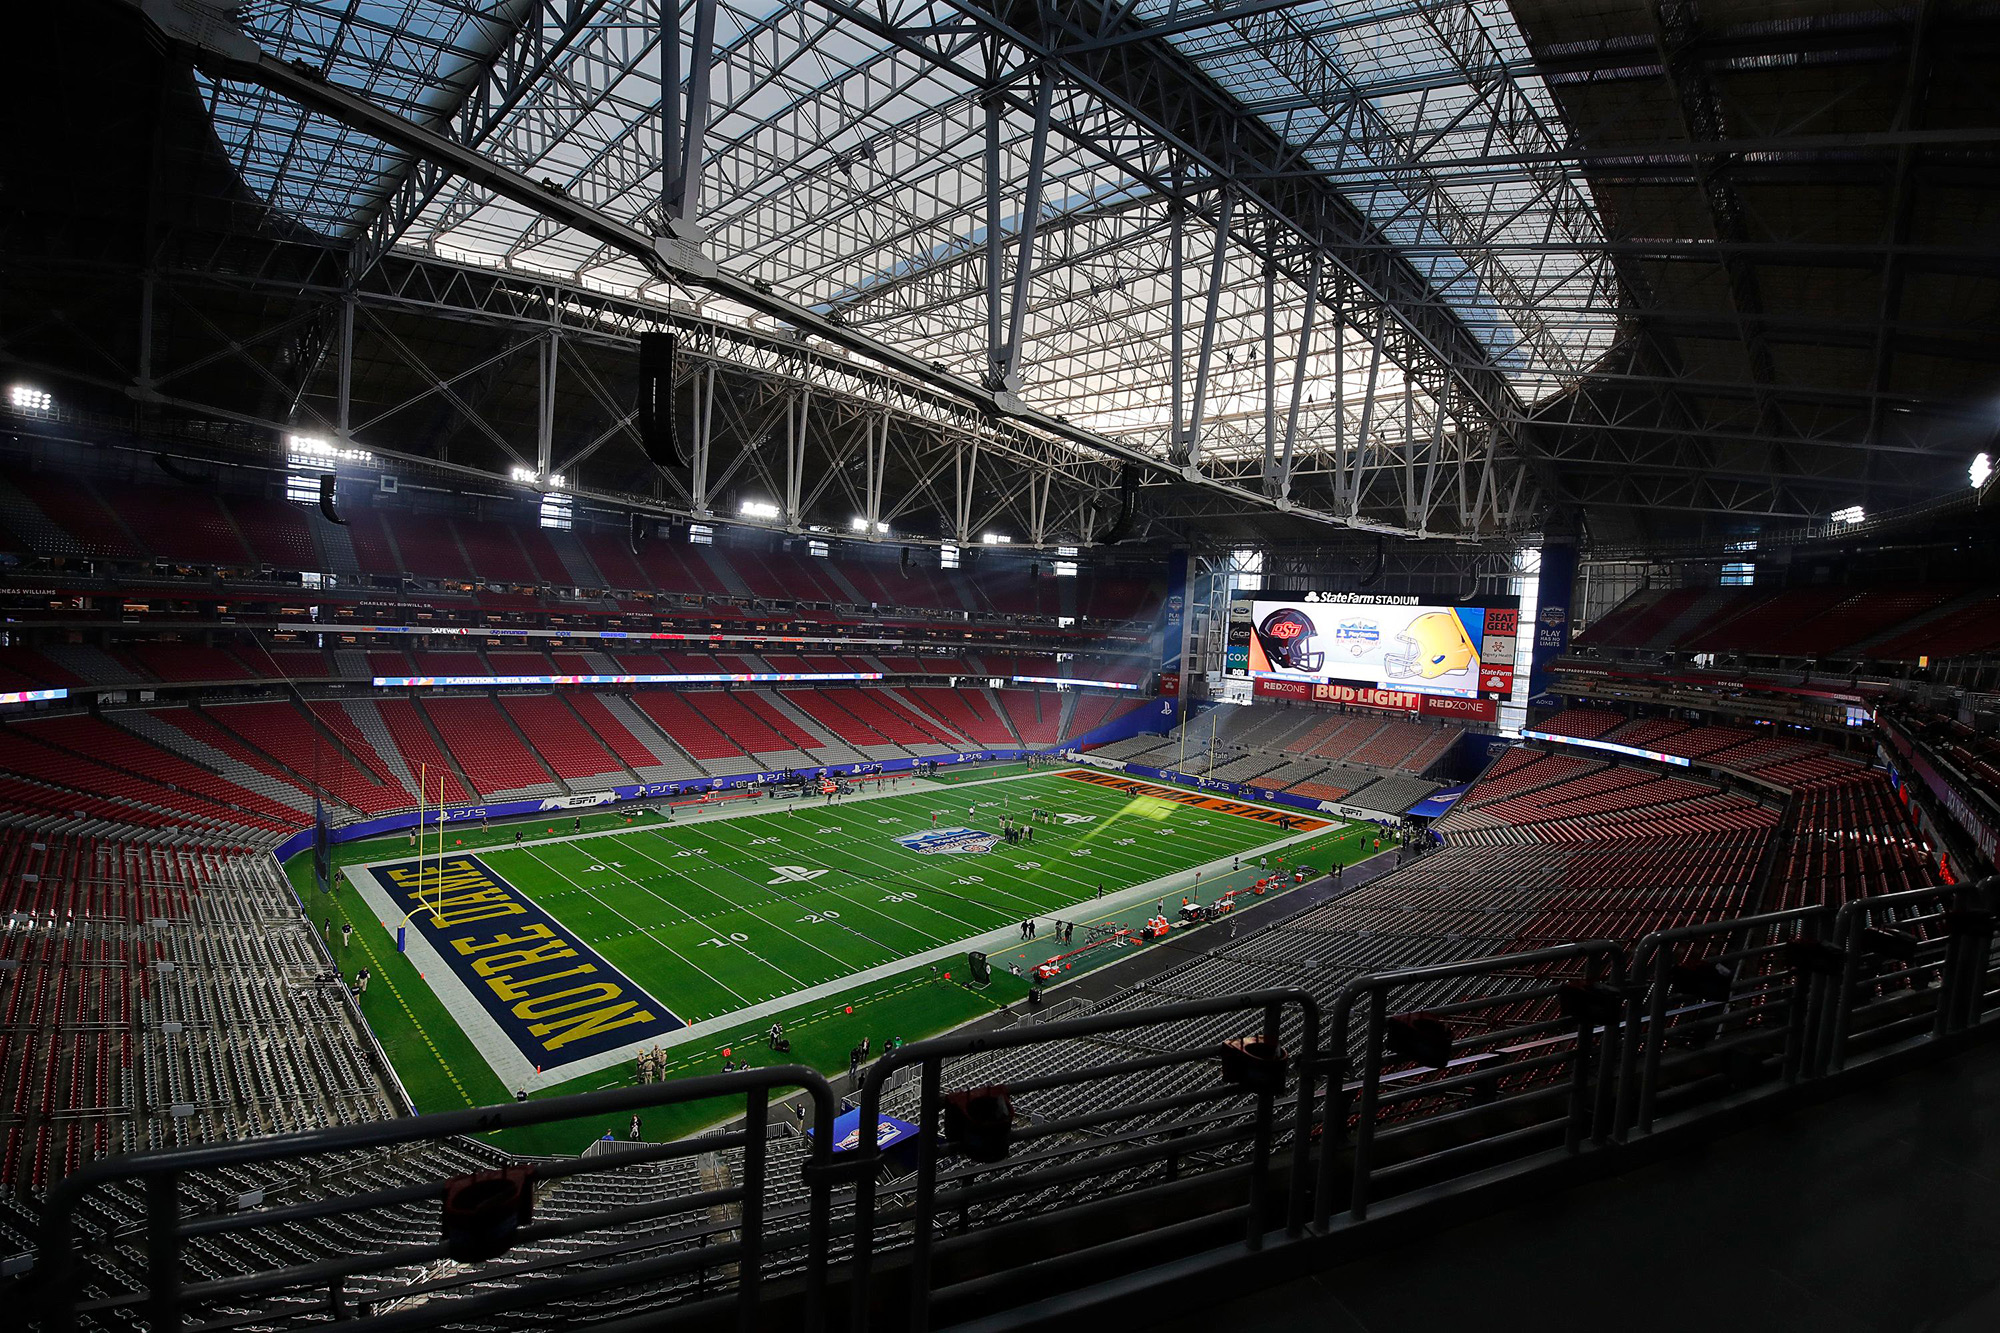 Tickets to 2023 Super Bowl in Arizona are dropping: Here's how much